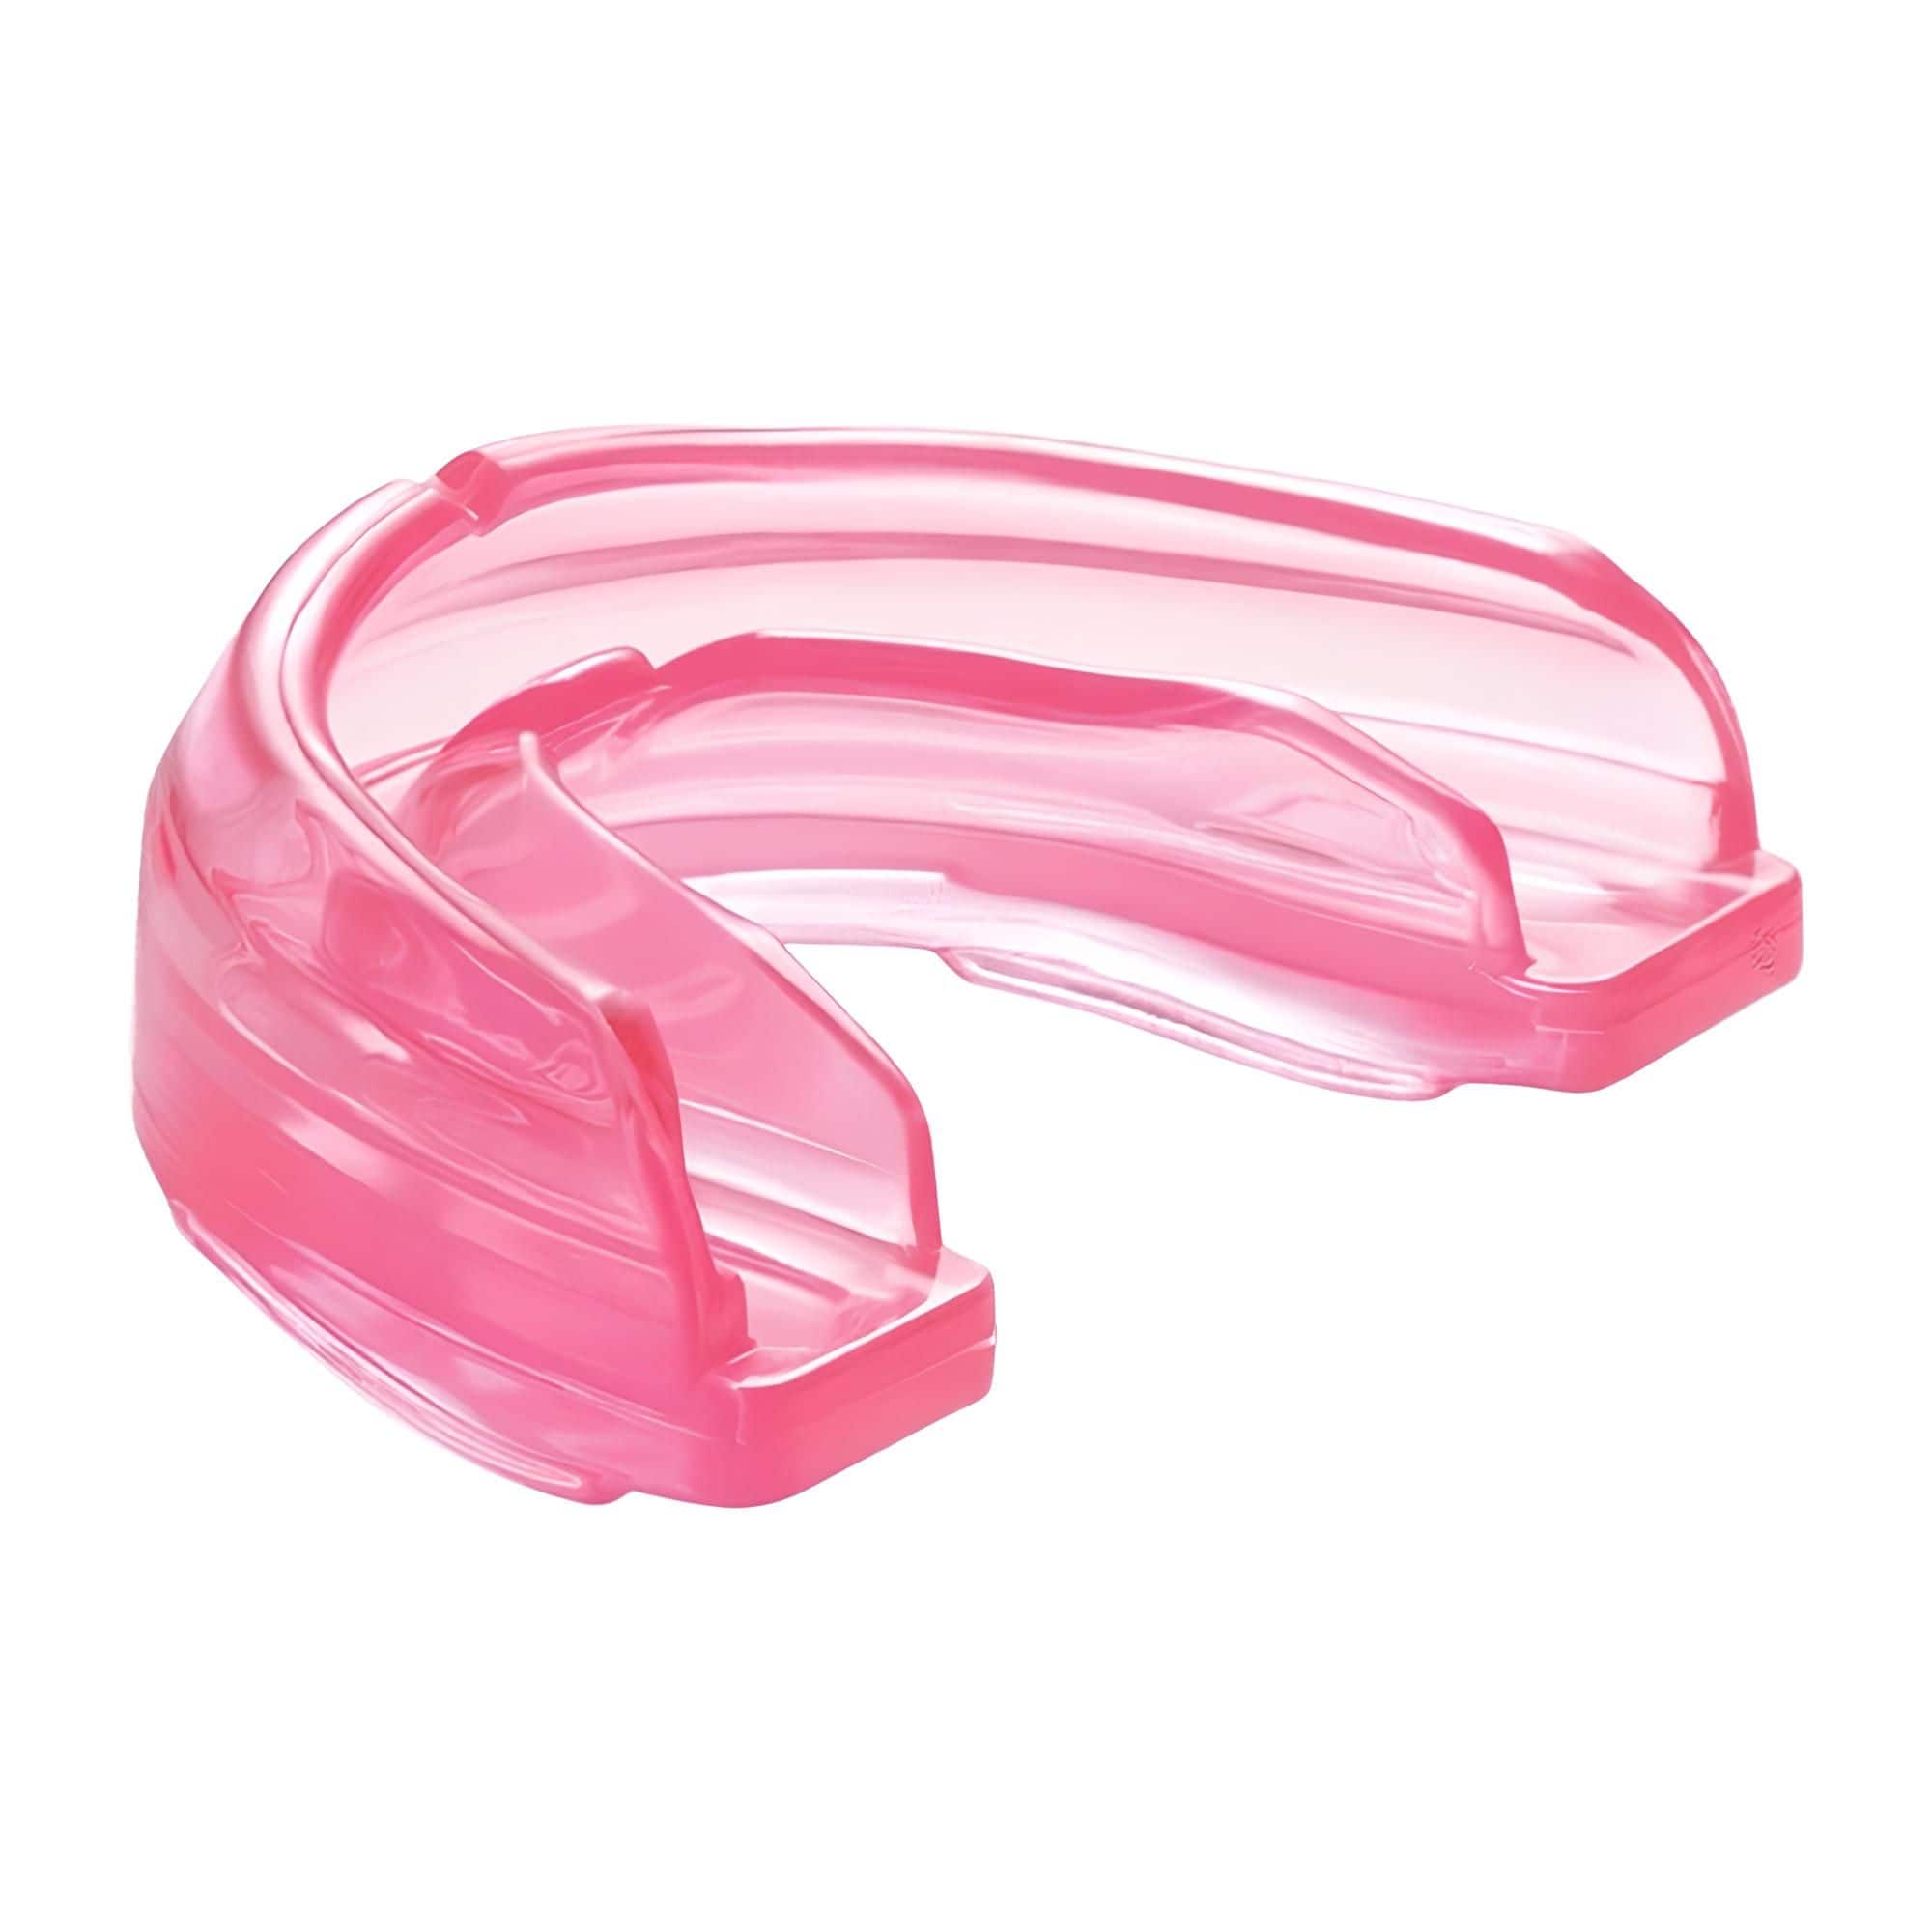 Which Mouthguards are the Best for Braces?